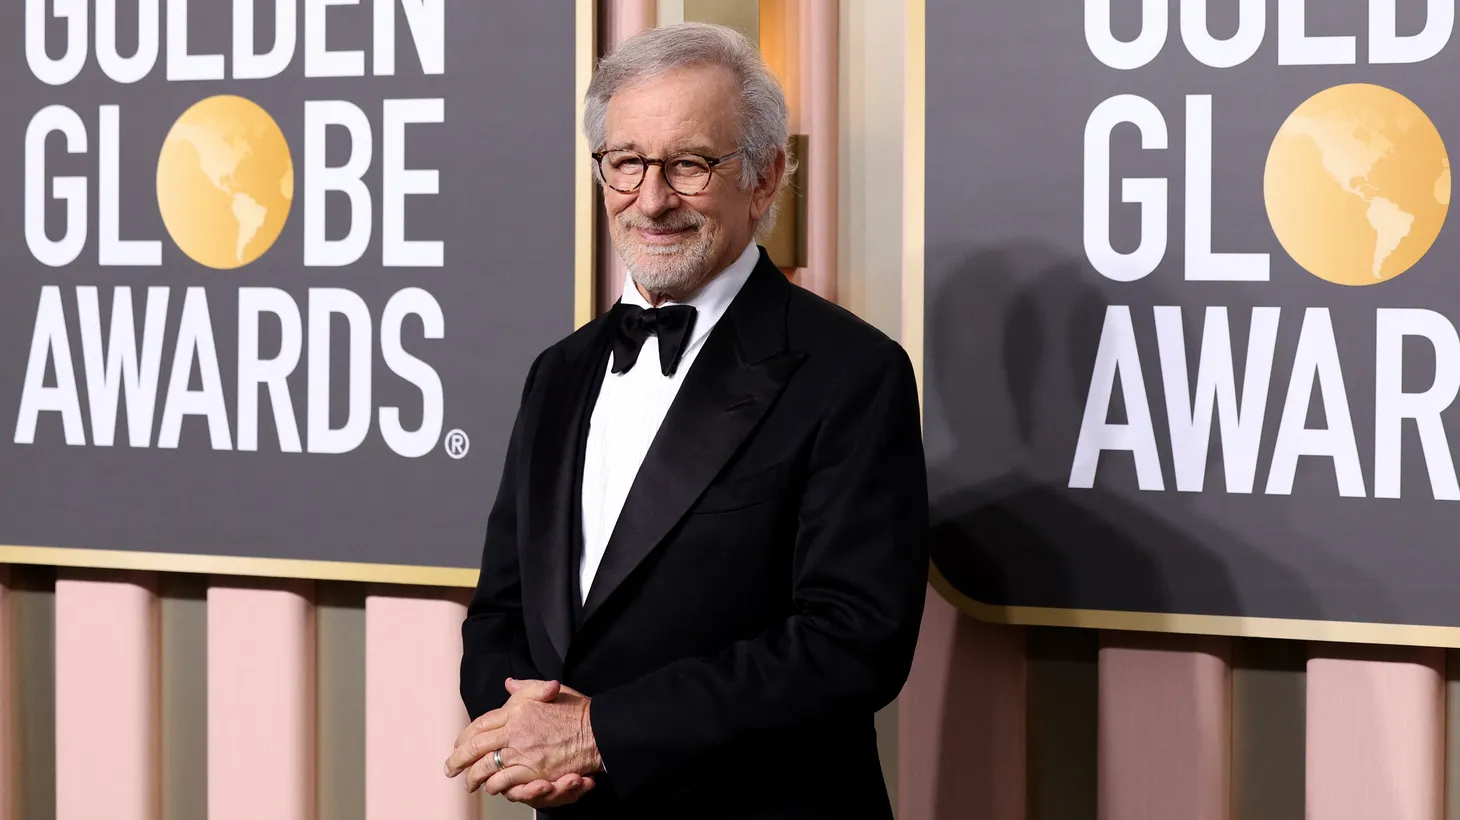 Director Steven Spielberg attends the 80th Annual Golden Globe Awards in Beverly Hills, California, on January 10, 2023.